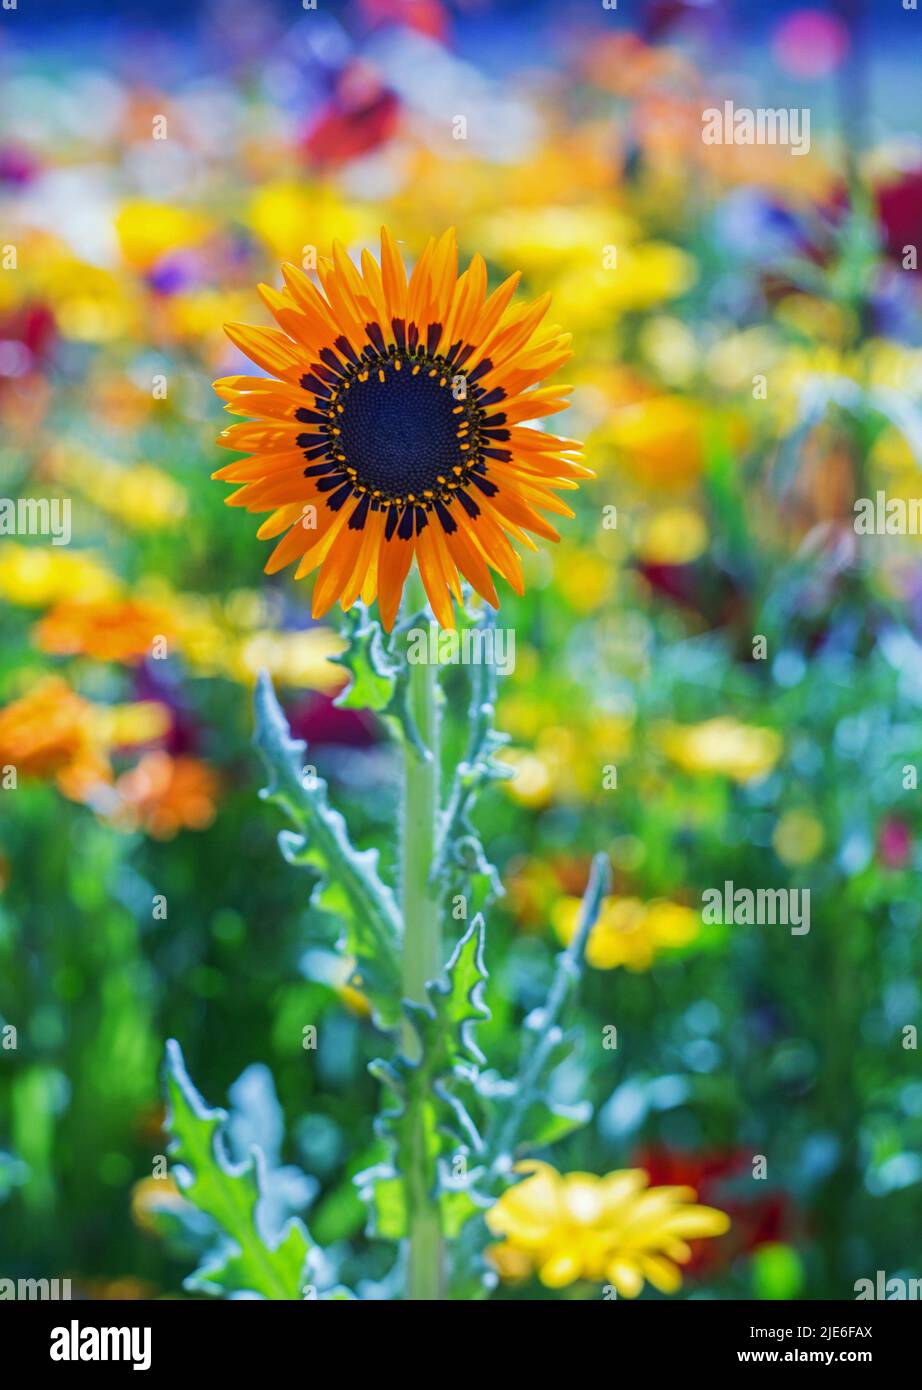 Beautiful Sunflower in full bloom with a natural floral out of focus background Stock Photo